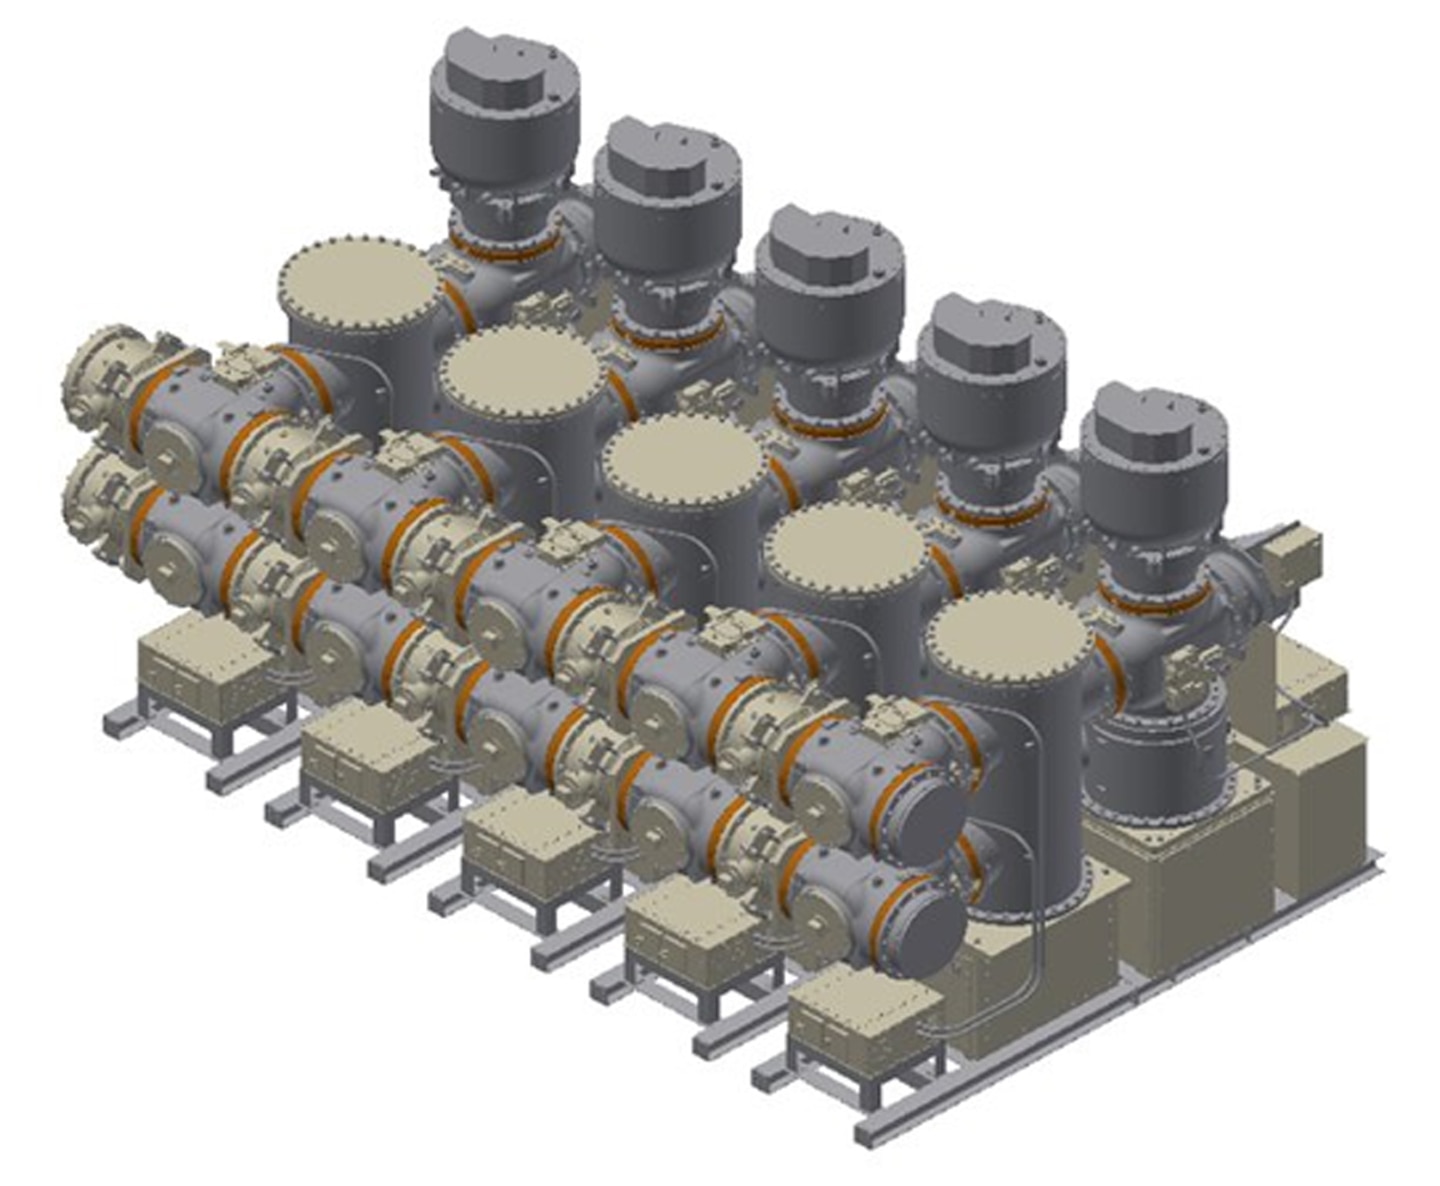 84kV dry air insulated switchgear (image)